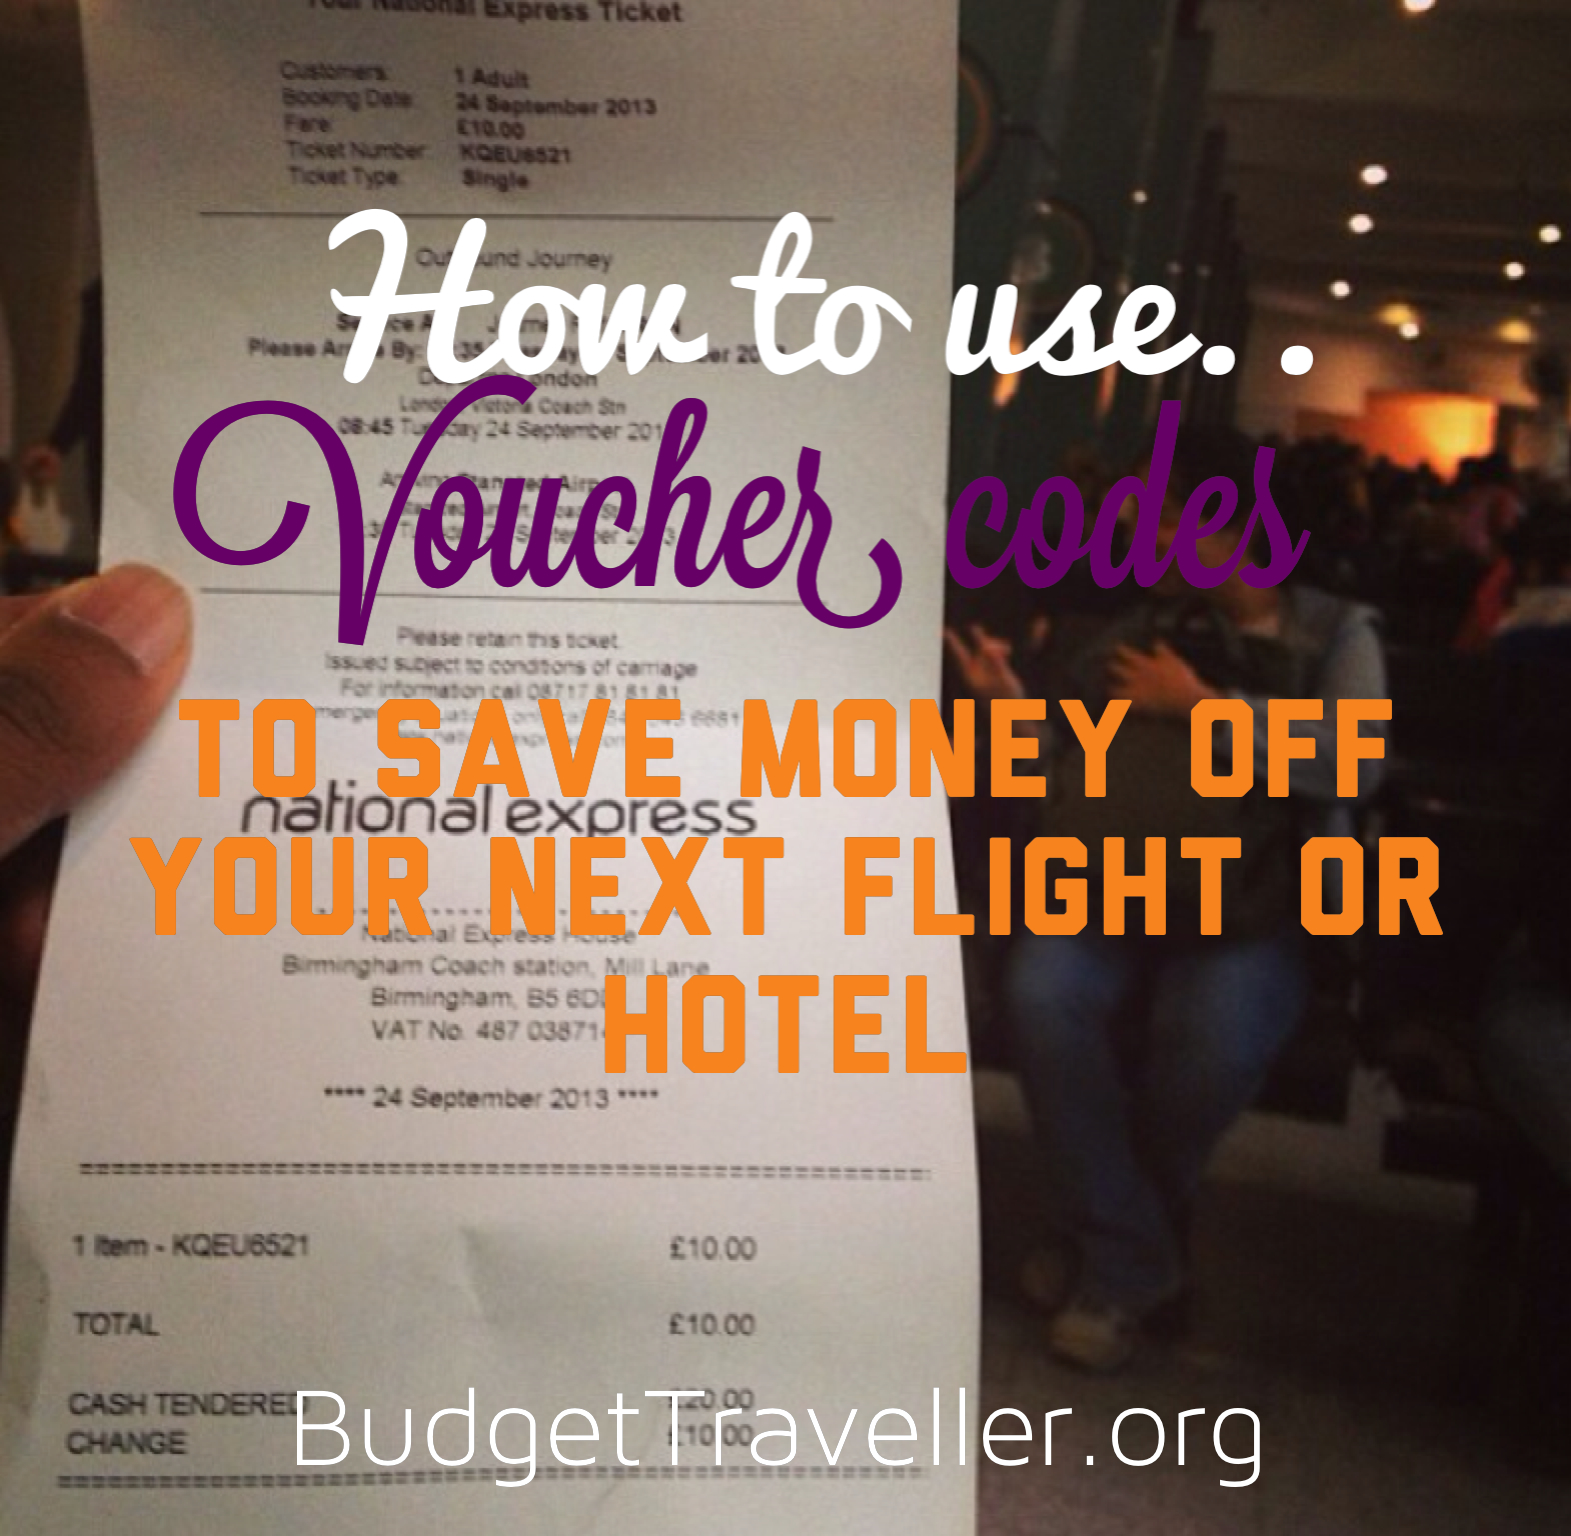 How to use voucher codes to save money off your next flight or hotel